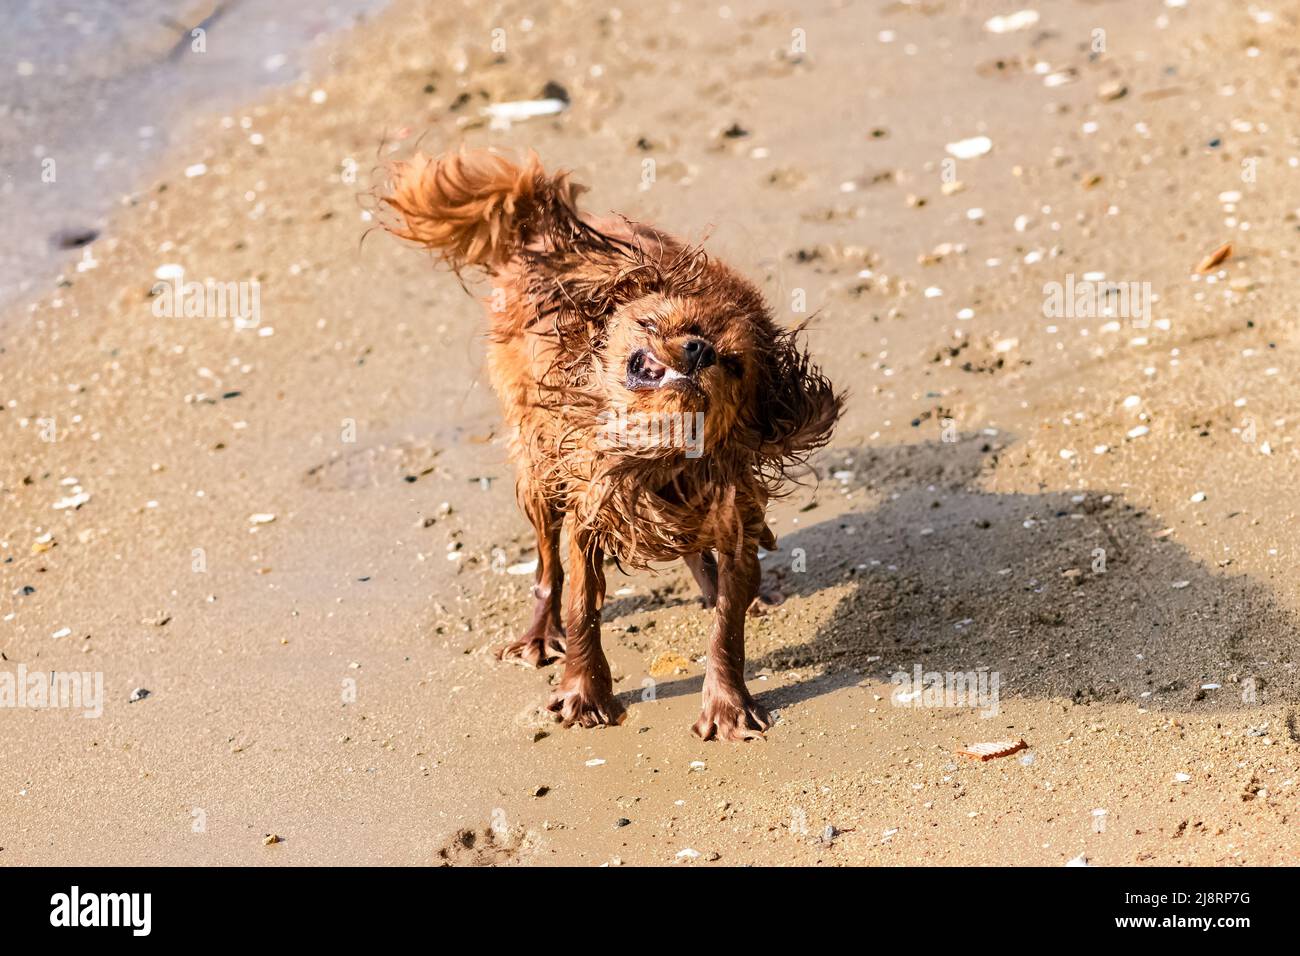 A dog cavalier king charles, a ruby puppy snorting as it comes out of the water, on the beach Stock Photo